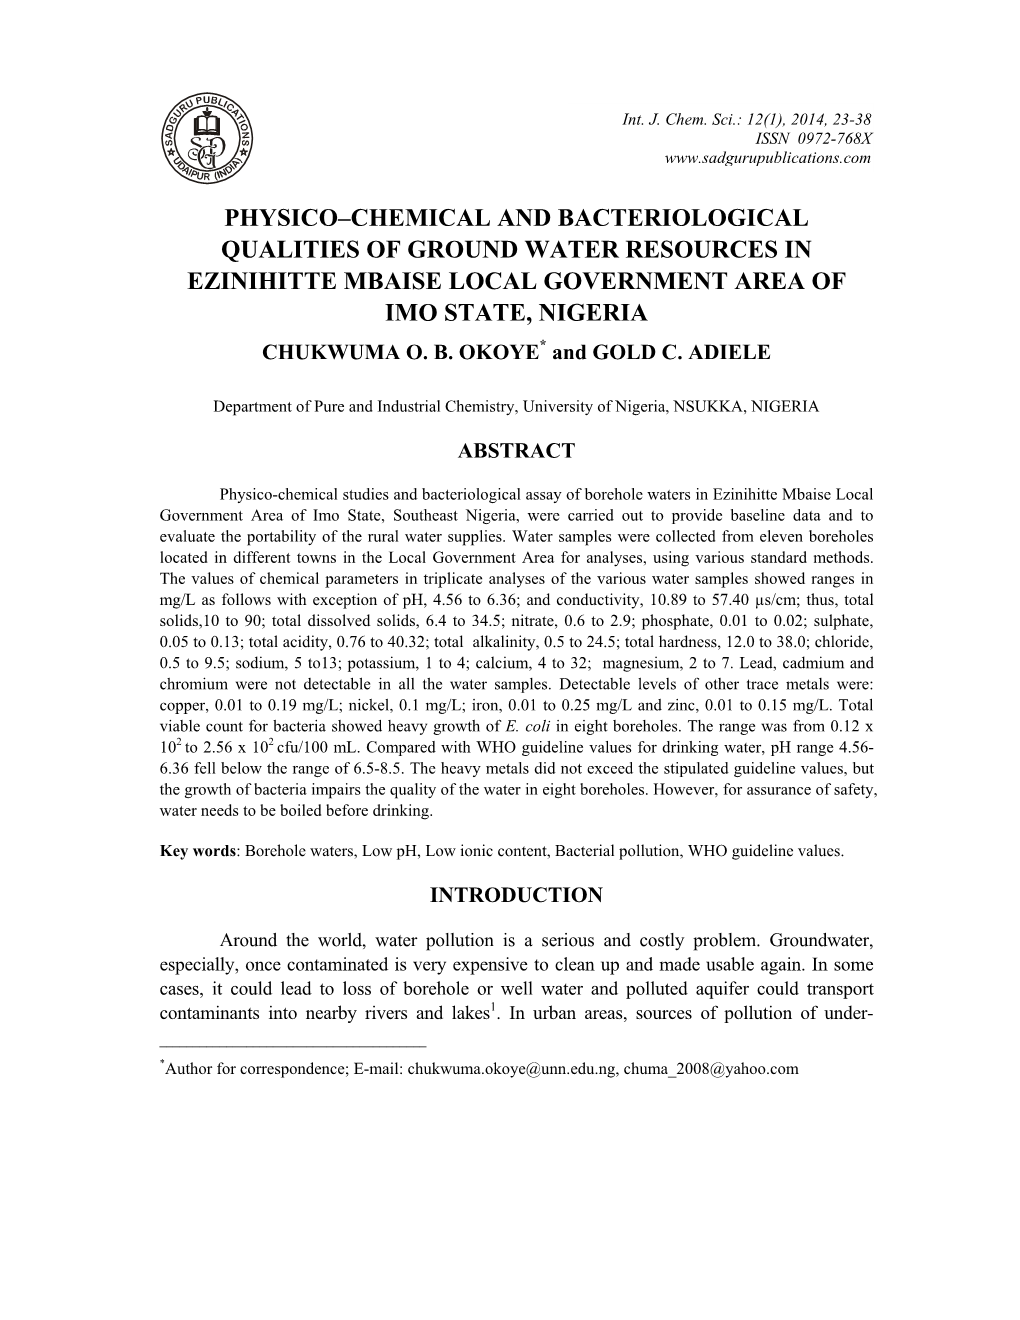 Physico–Chemical and Bacteriological Qualities of Ground Water Resources in Ezinihitte Mbaise Local Government Area of Imo State, Nigeria Chukwuma O